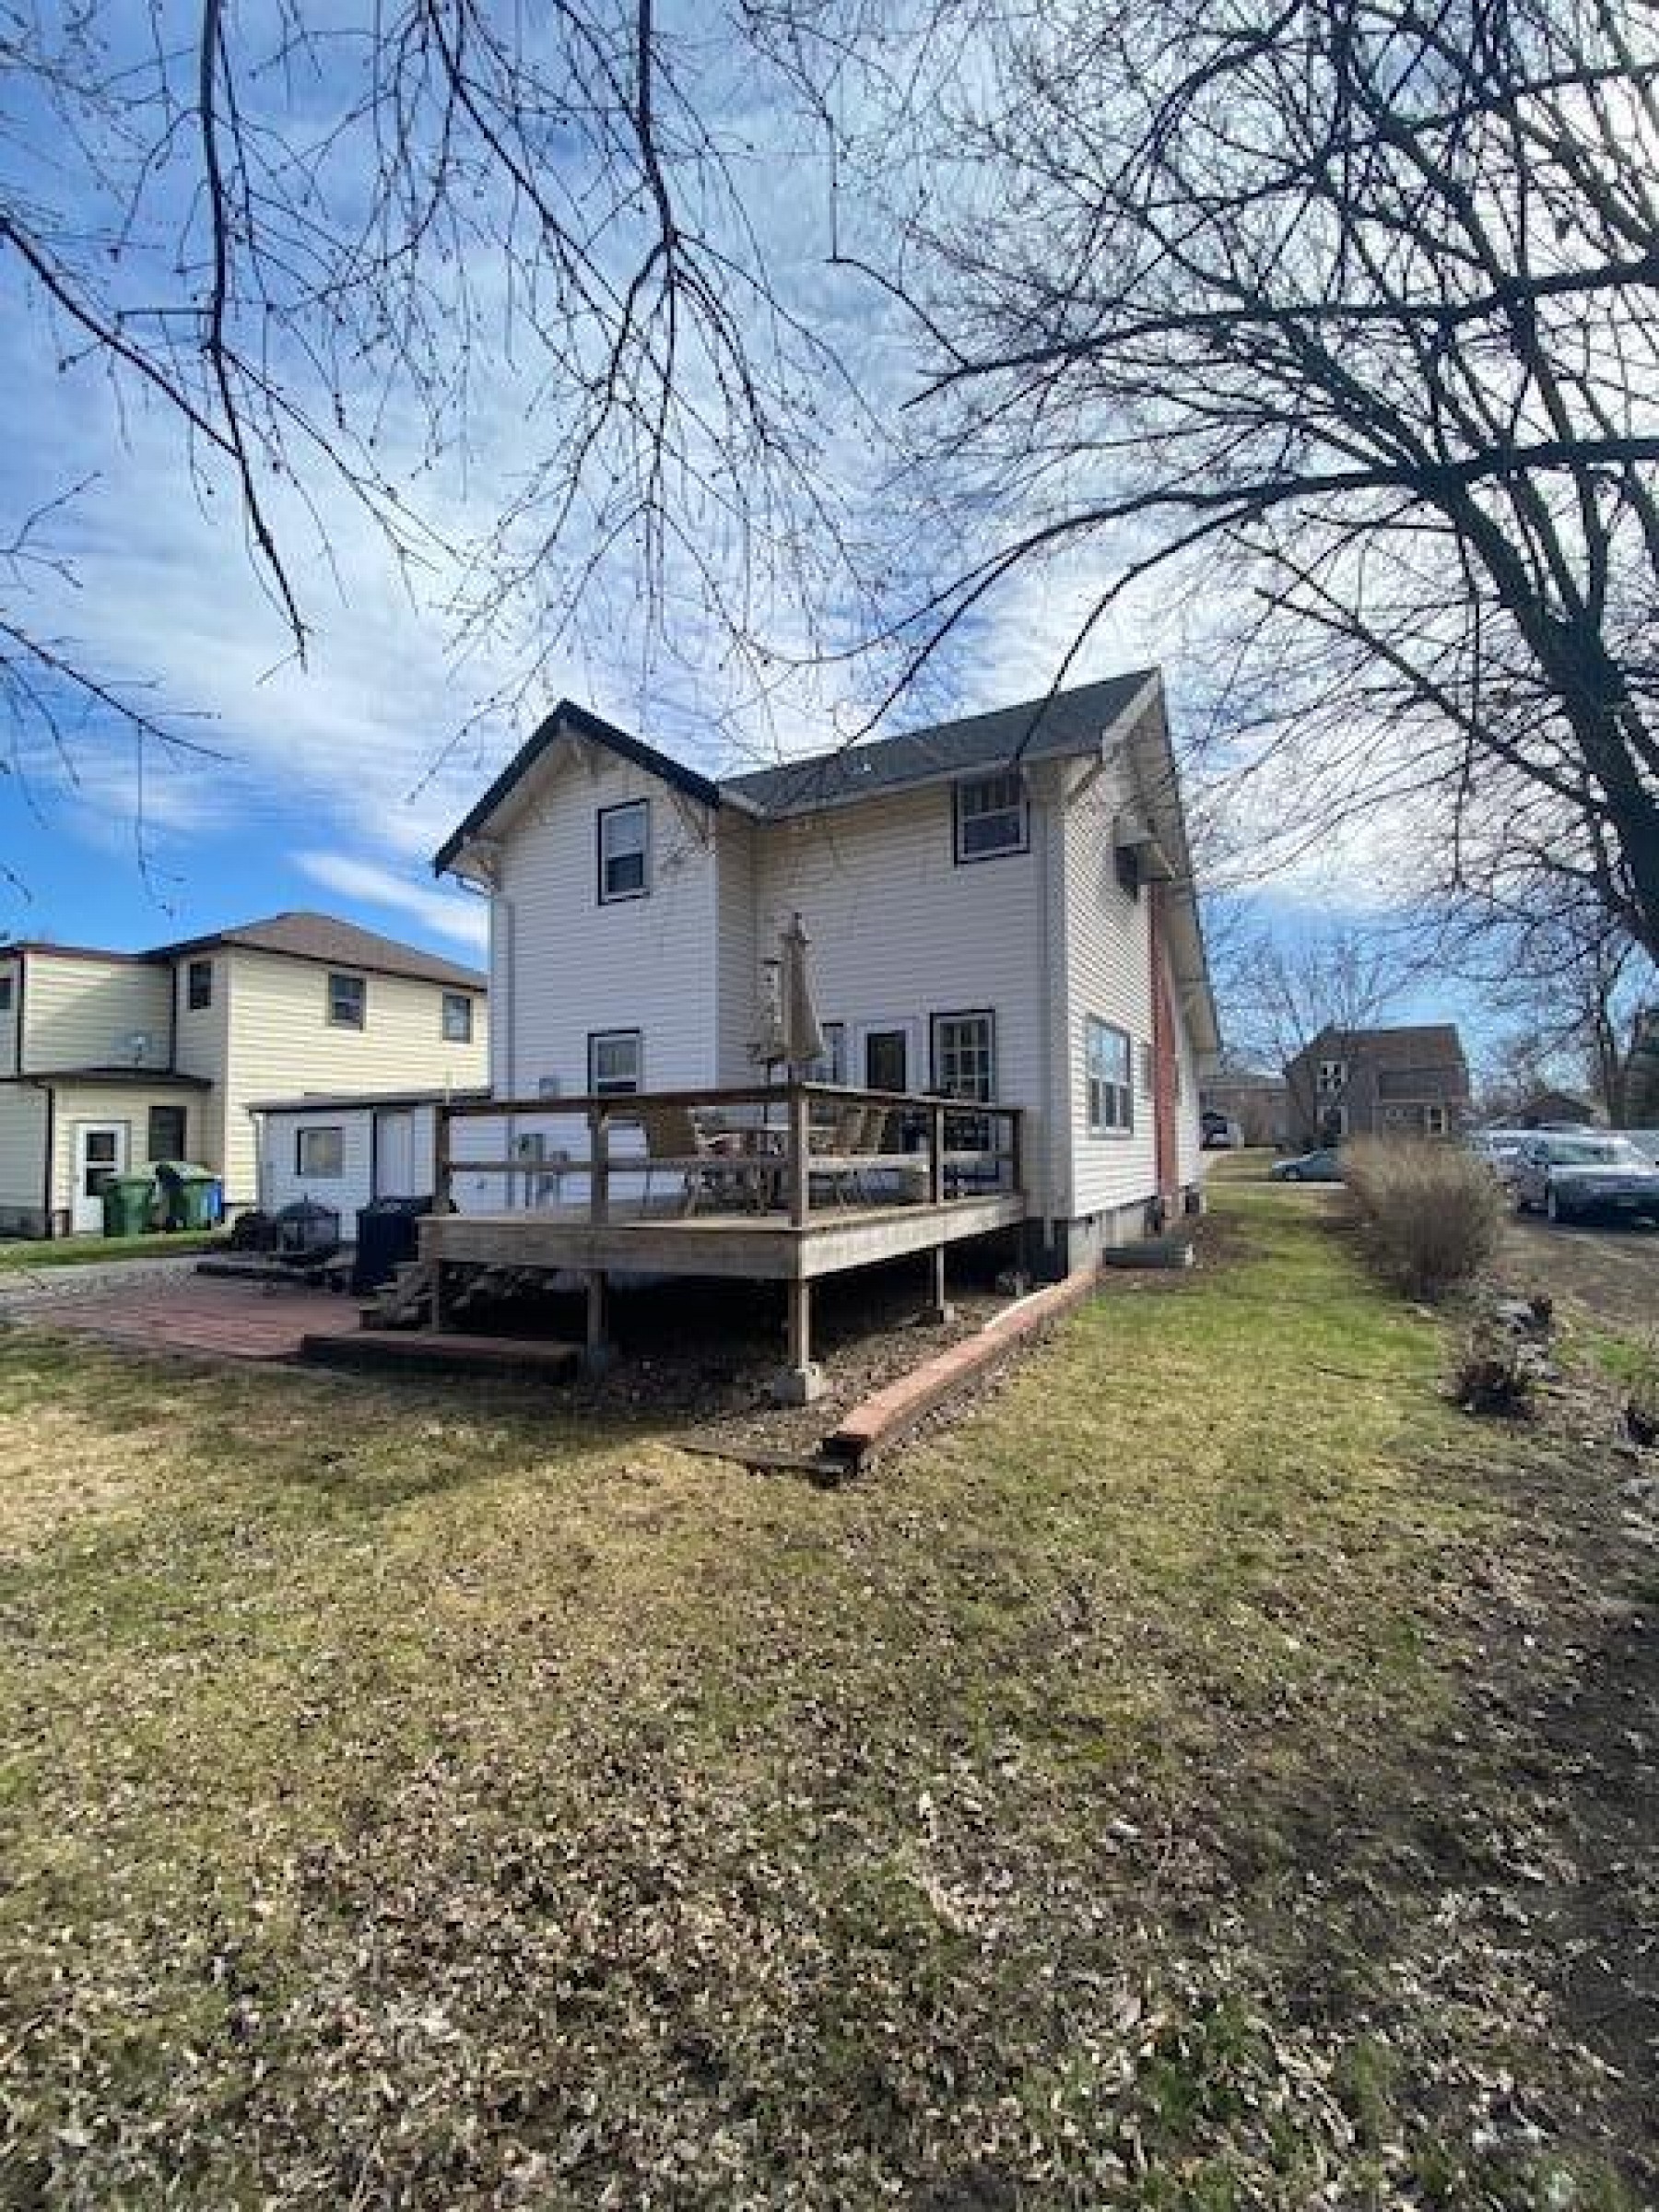 925 6th Avenue, Brookings, SD 57006